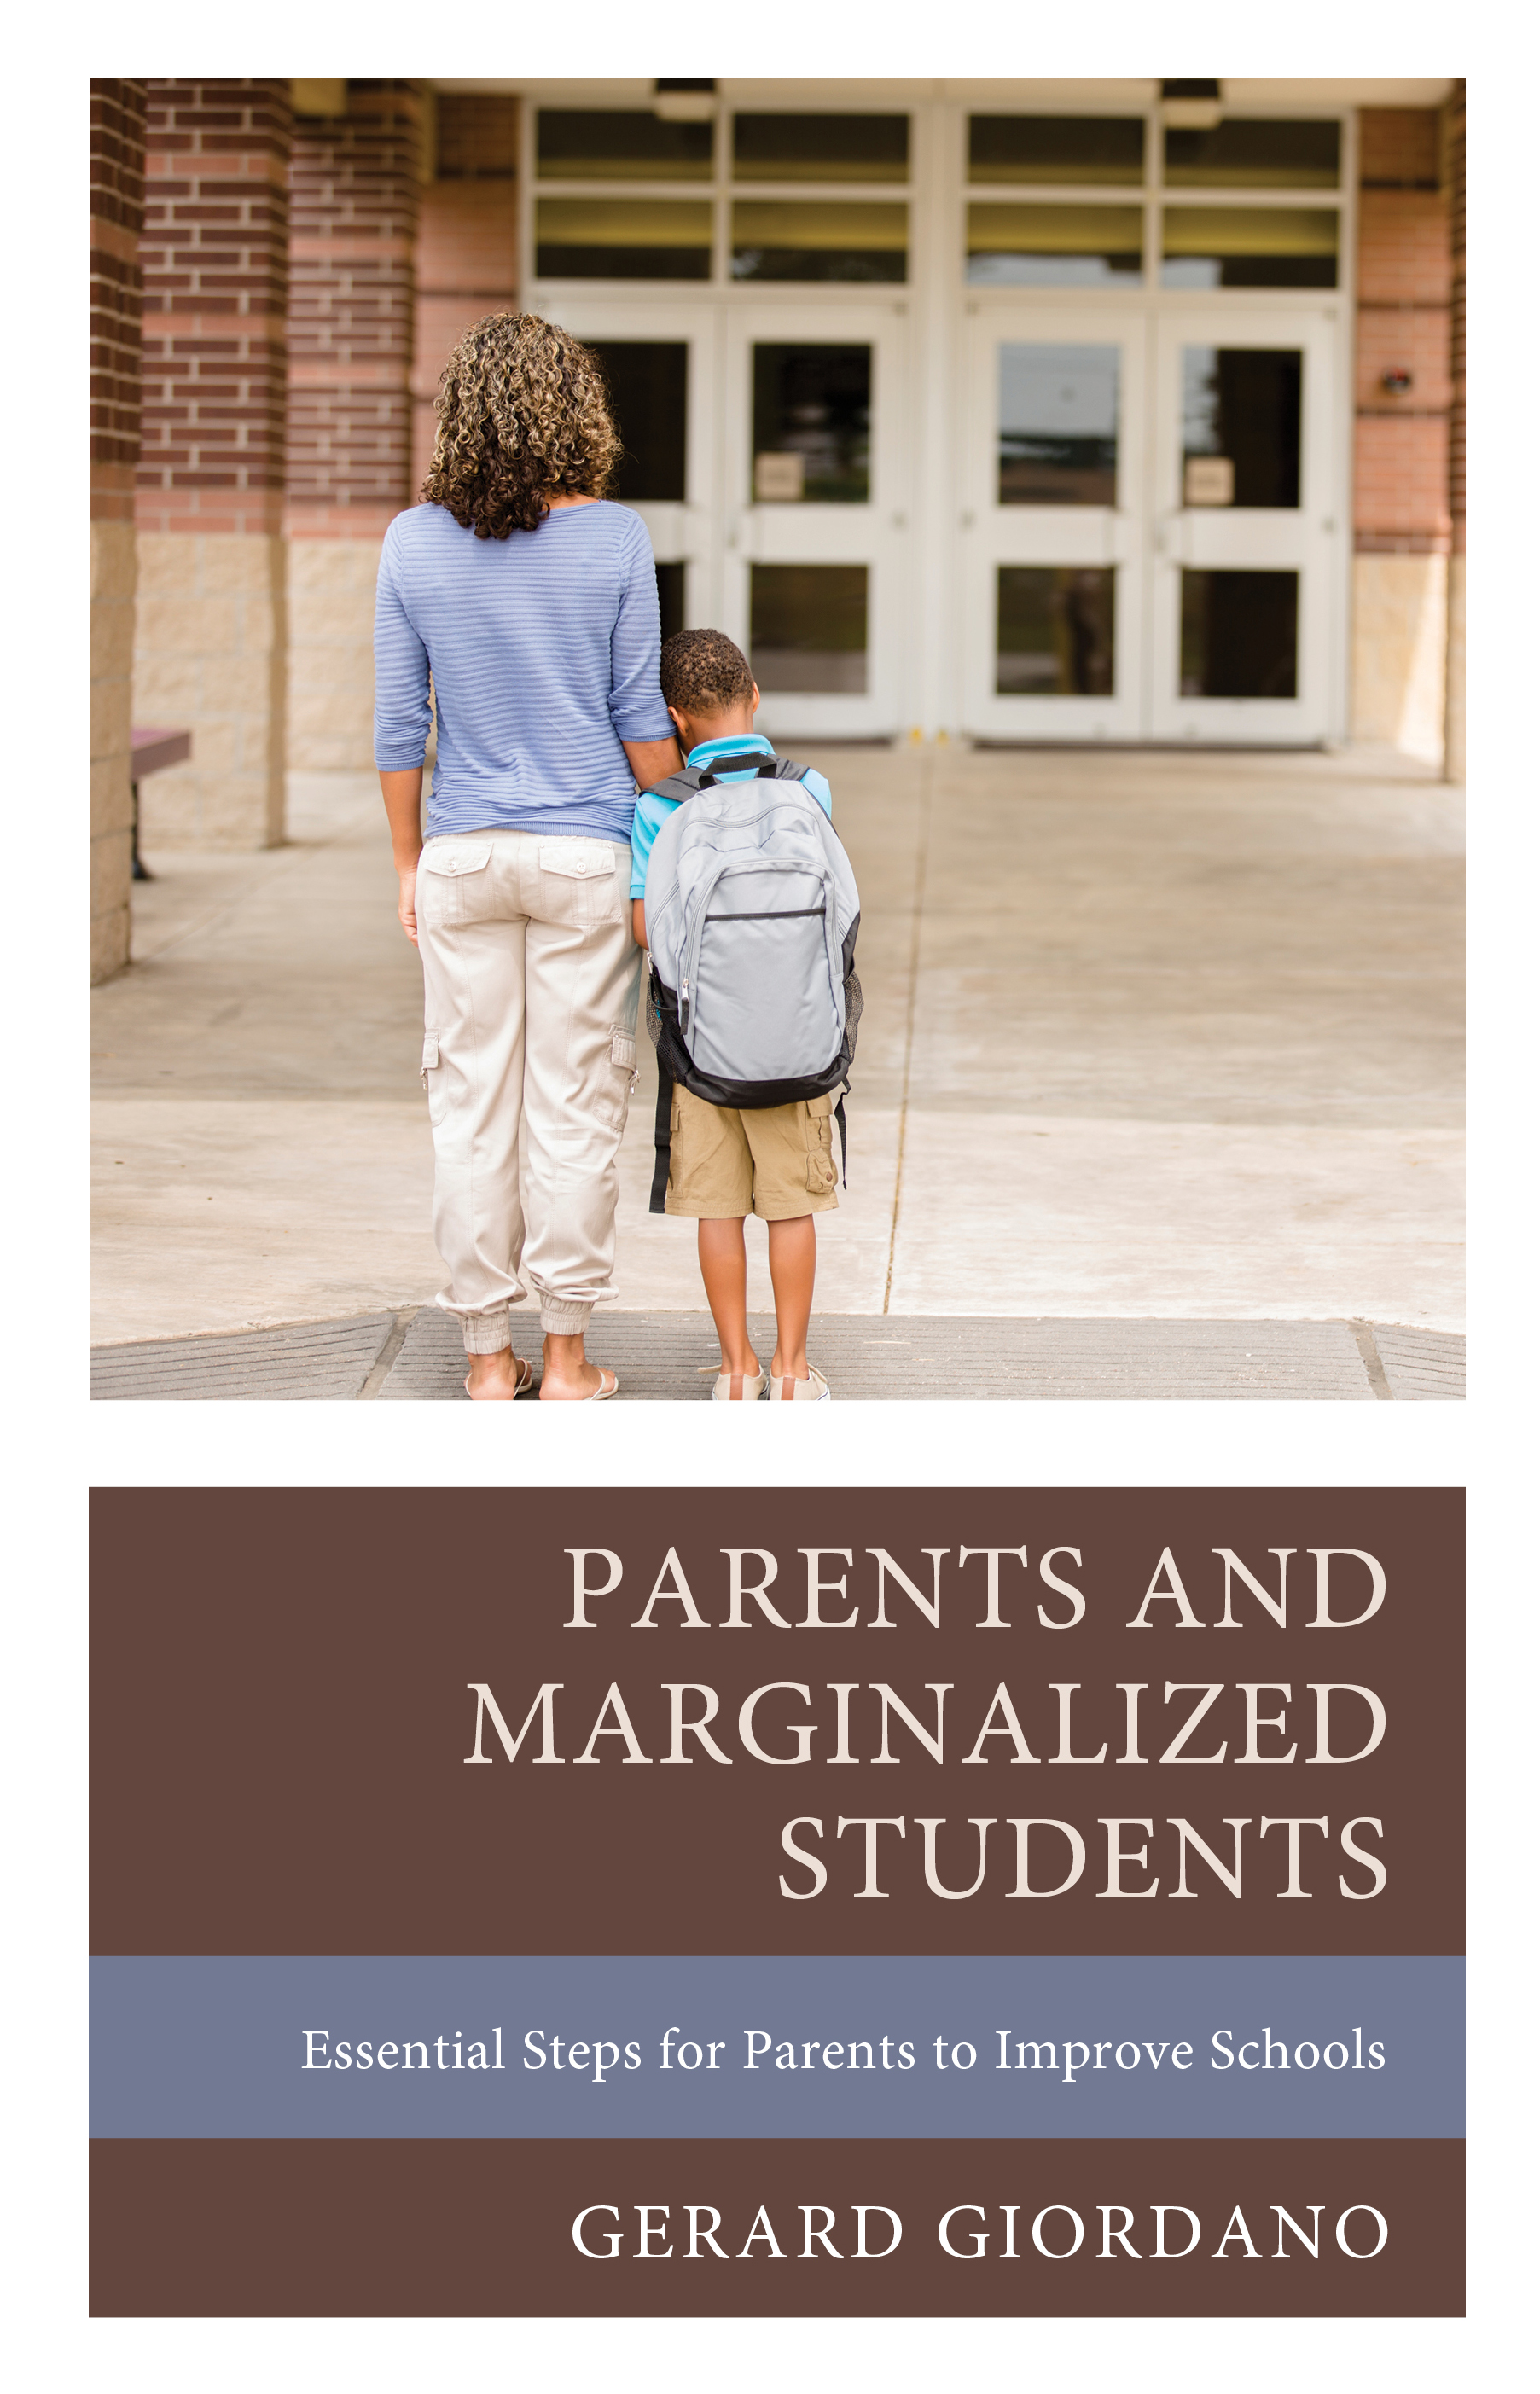 Parents and Marginalized Students: Essential Steps for Parents to Improve Schools